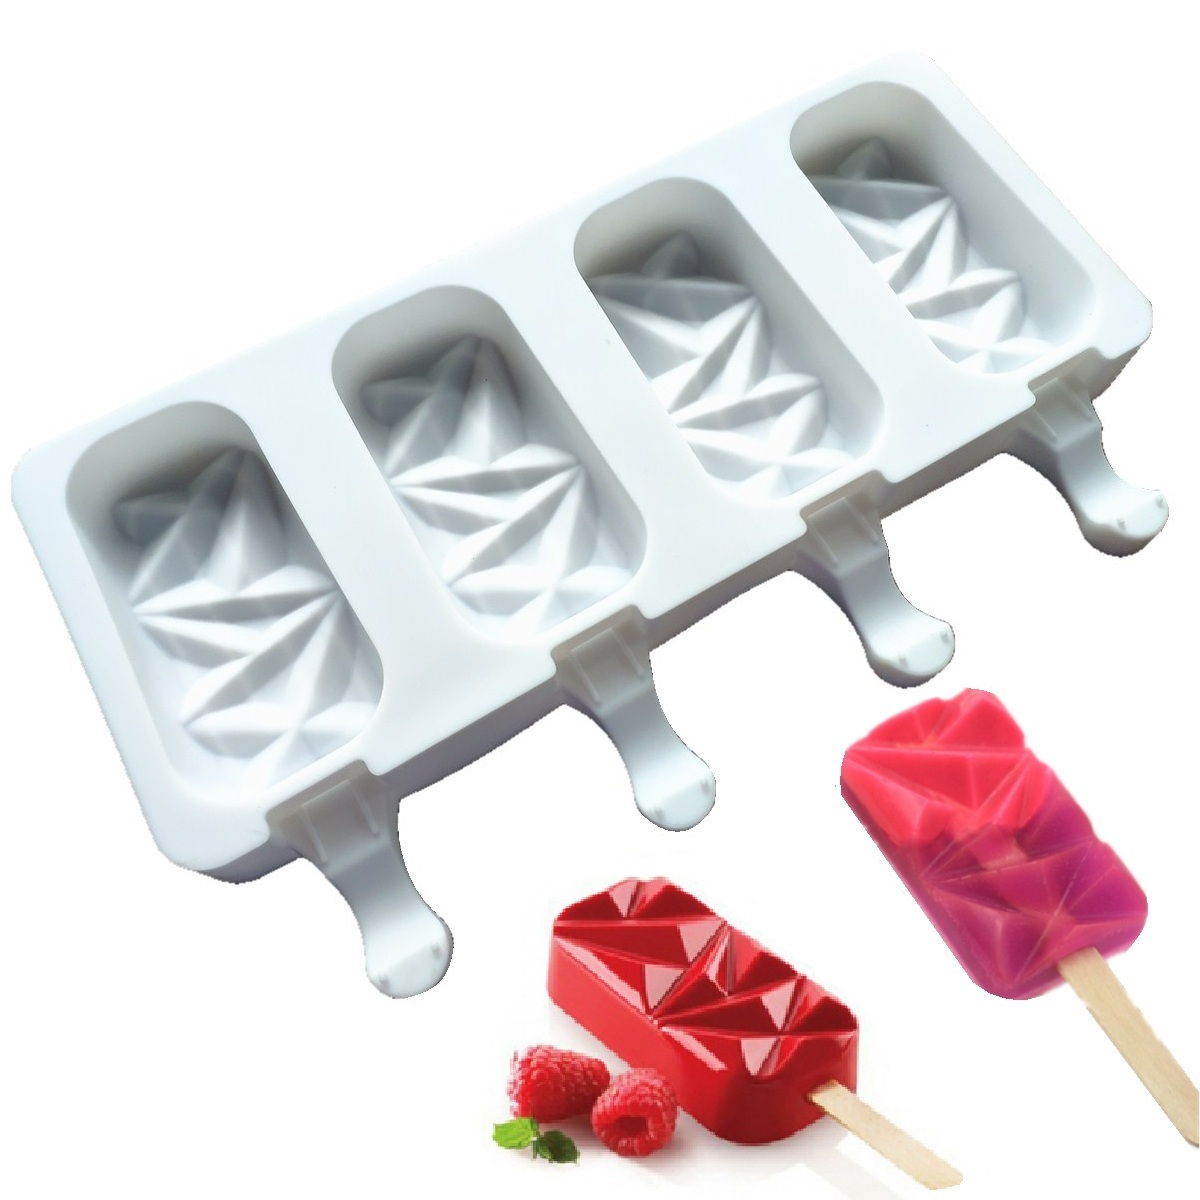 4 Cell New Big Diamond Lolly Ice Cream Block Silicone Mold Freeze Ice Pop Maker Popsicle Barrel DIY Mould Dessert Mold Tools